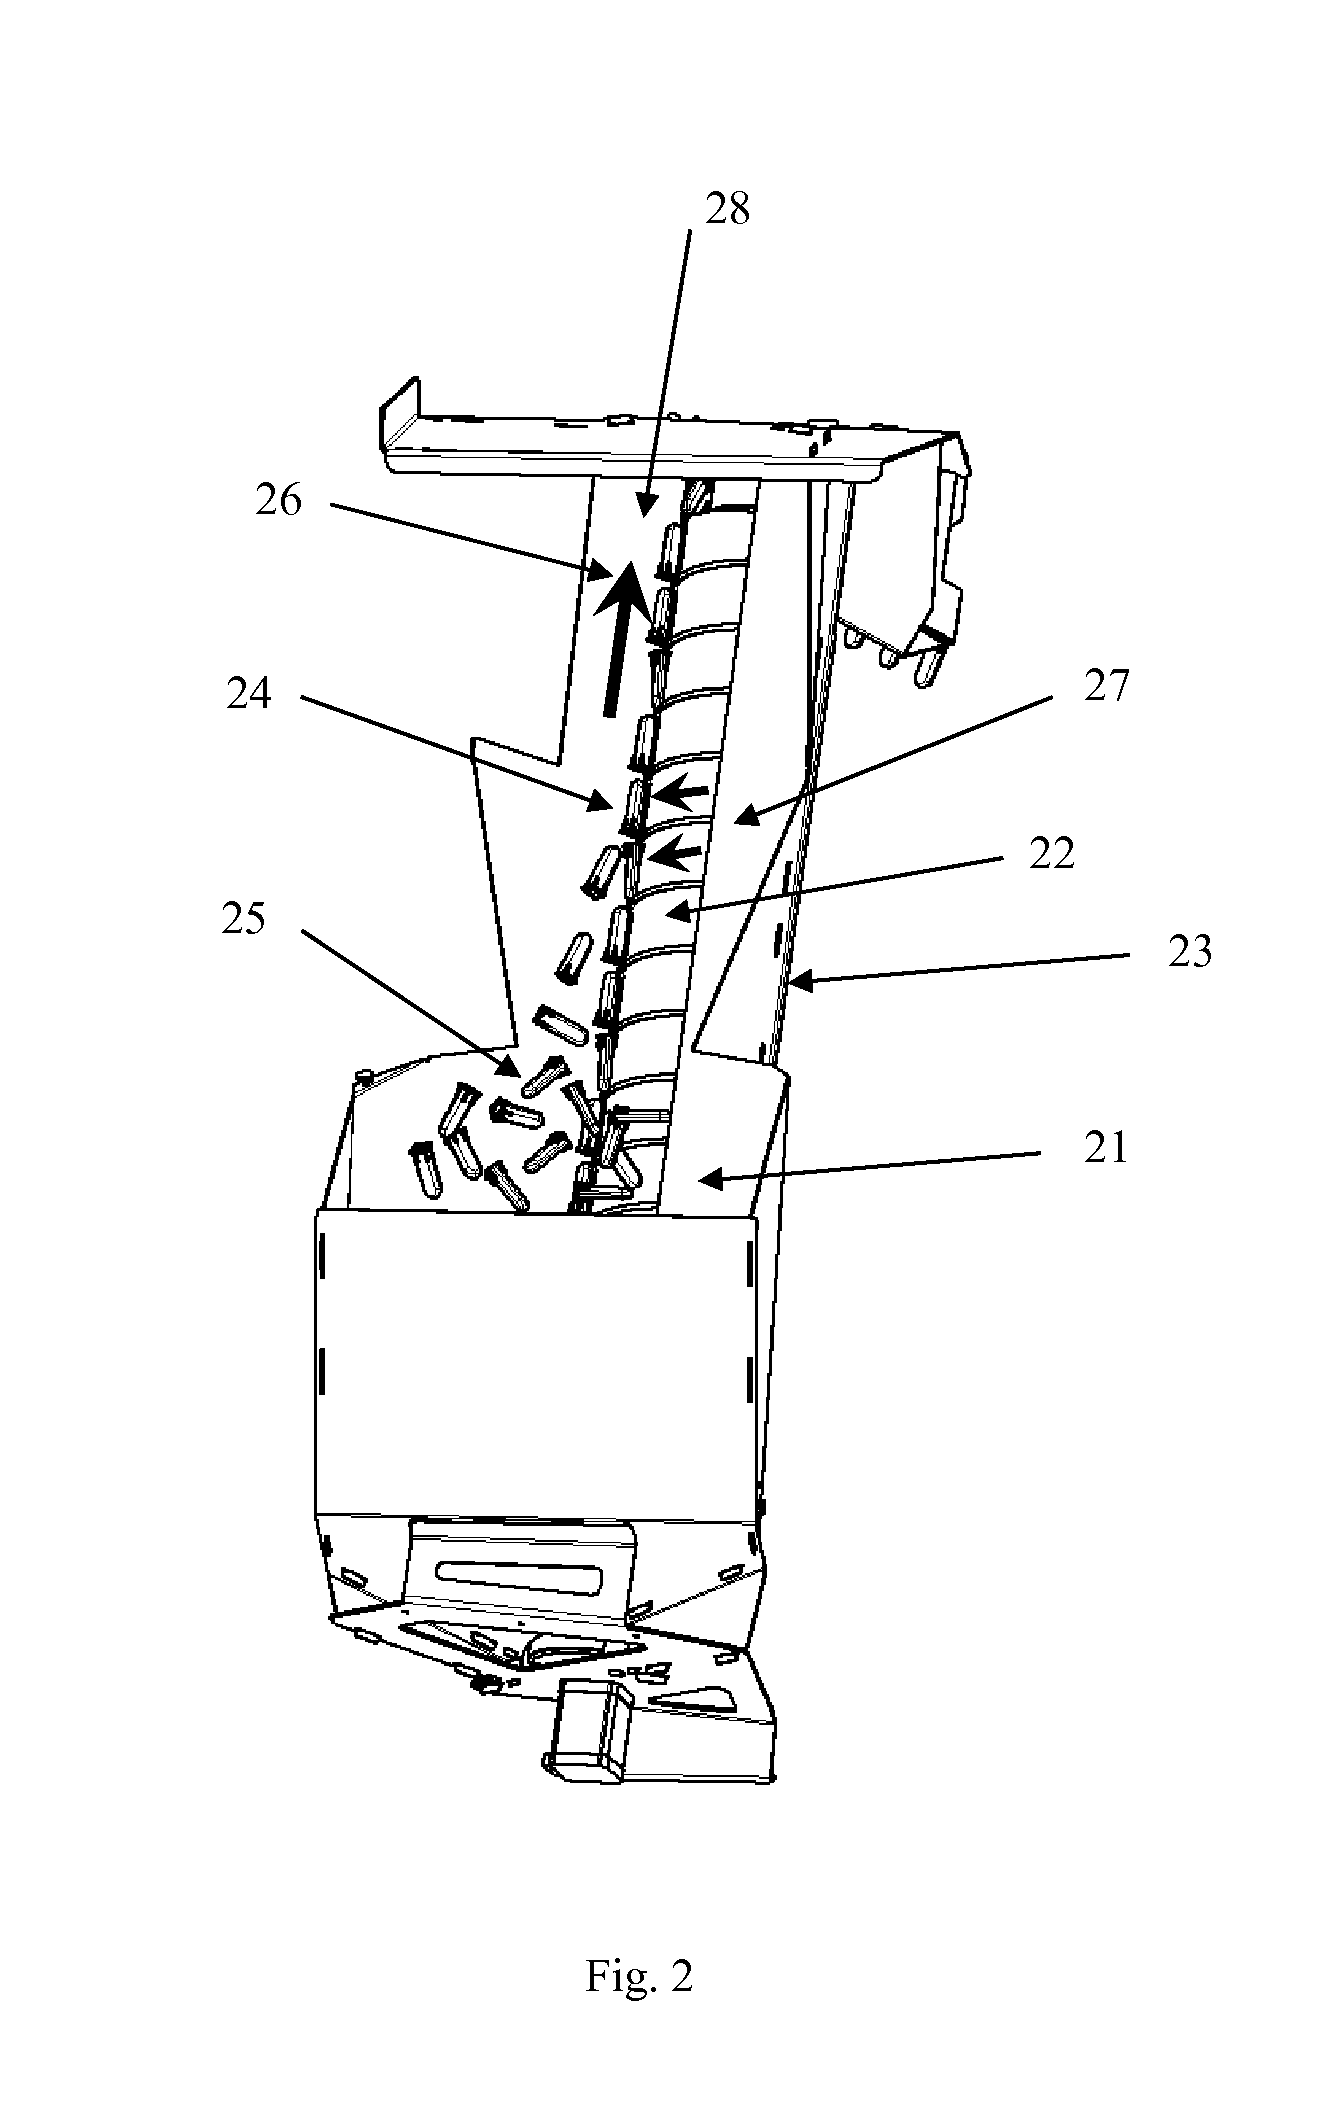 Device for transportation, separation and orientation of cuvettes